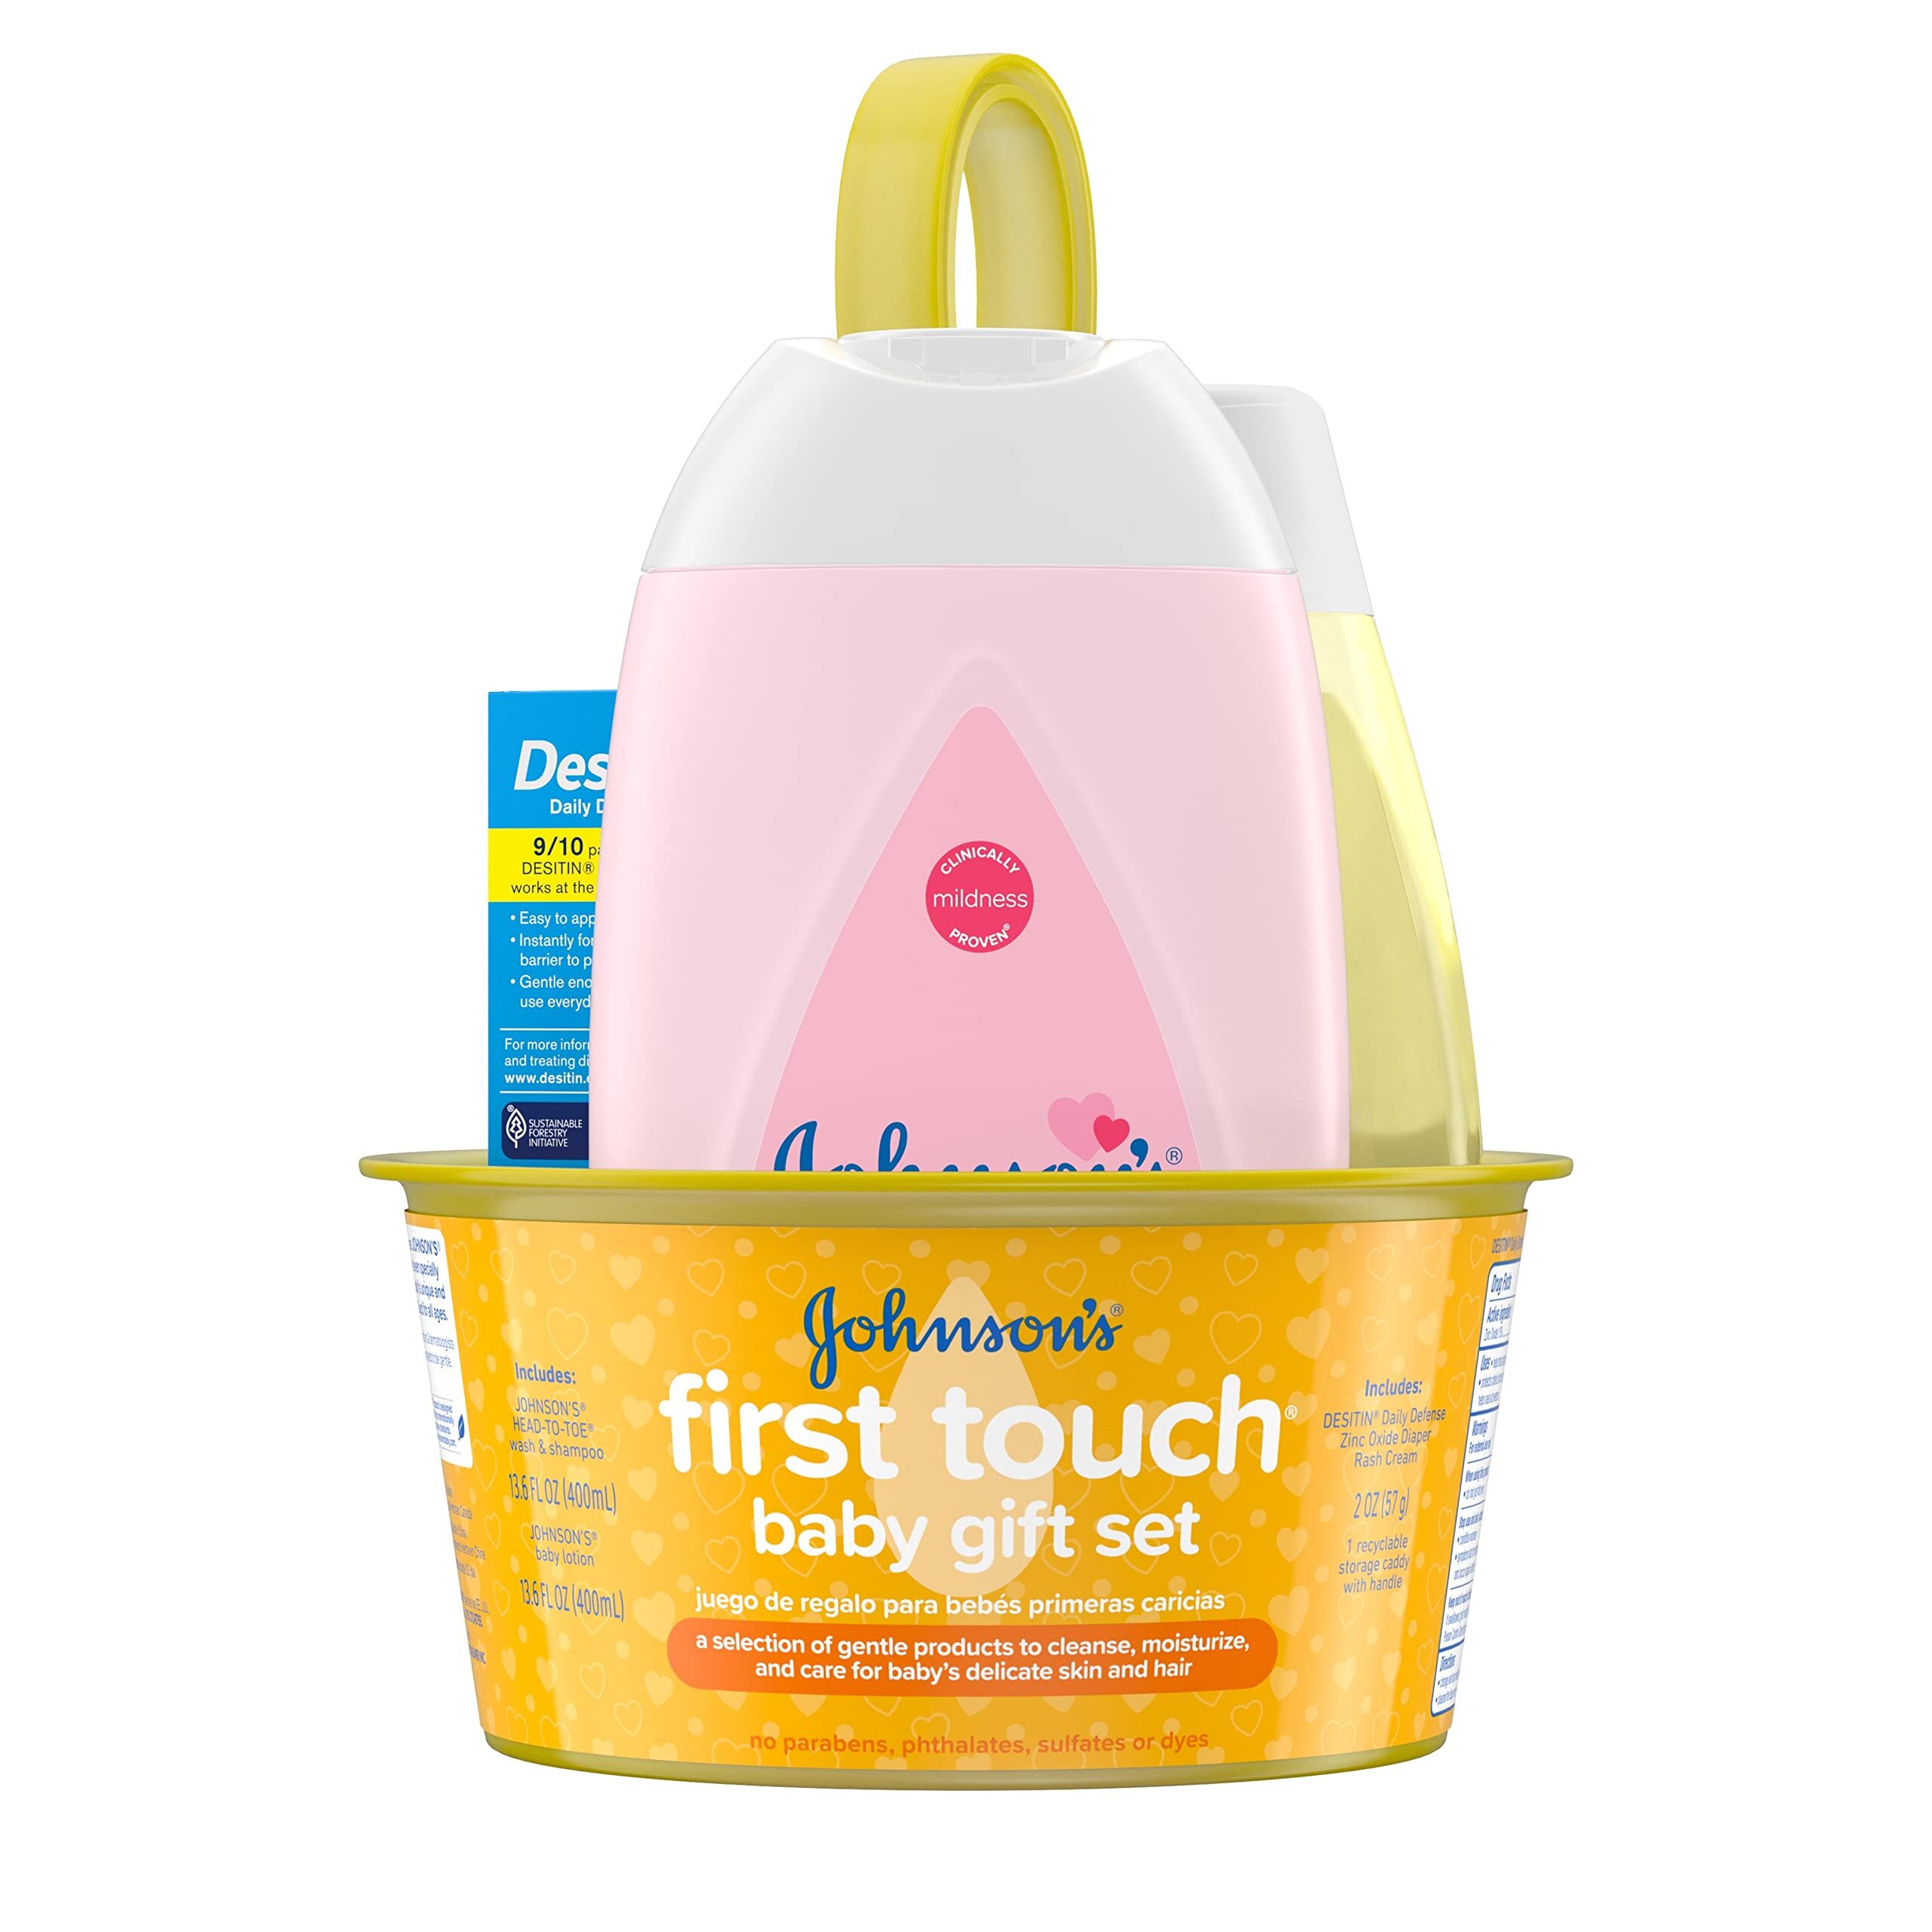 Johnsons First Touch Baby gift Set, Baby Bath, Skin & Hair Essential Products, Kit for New Parents with Wash &